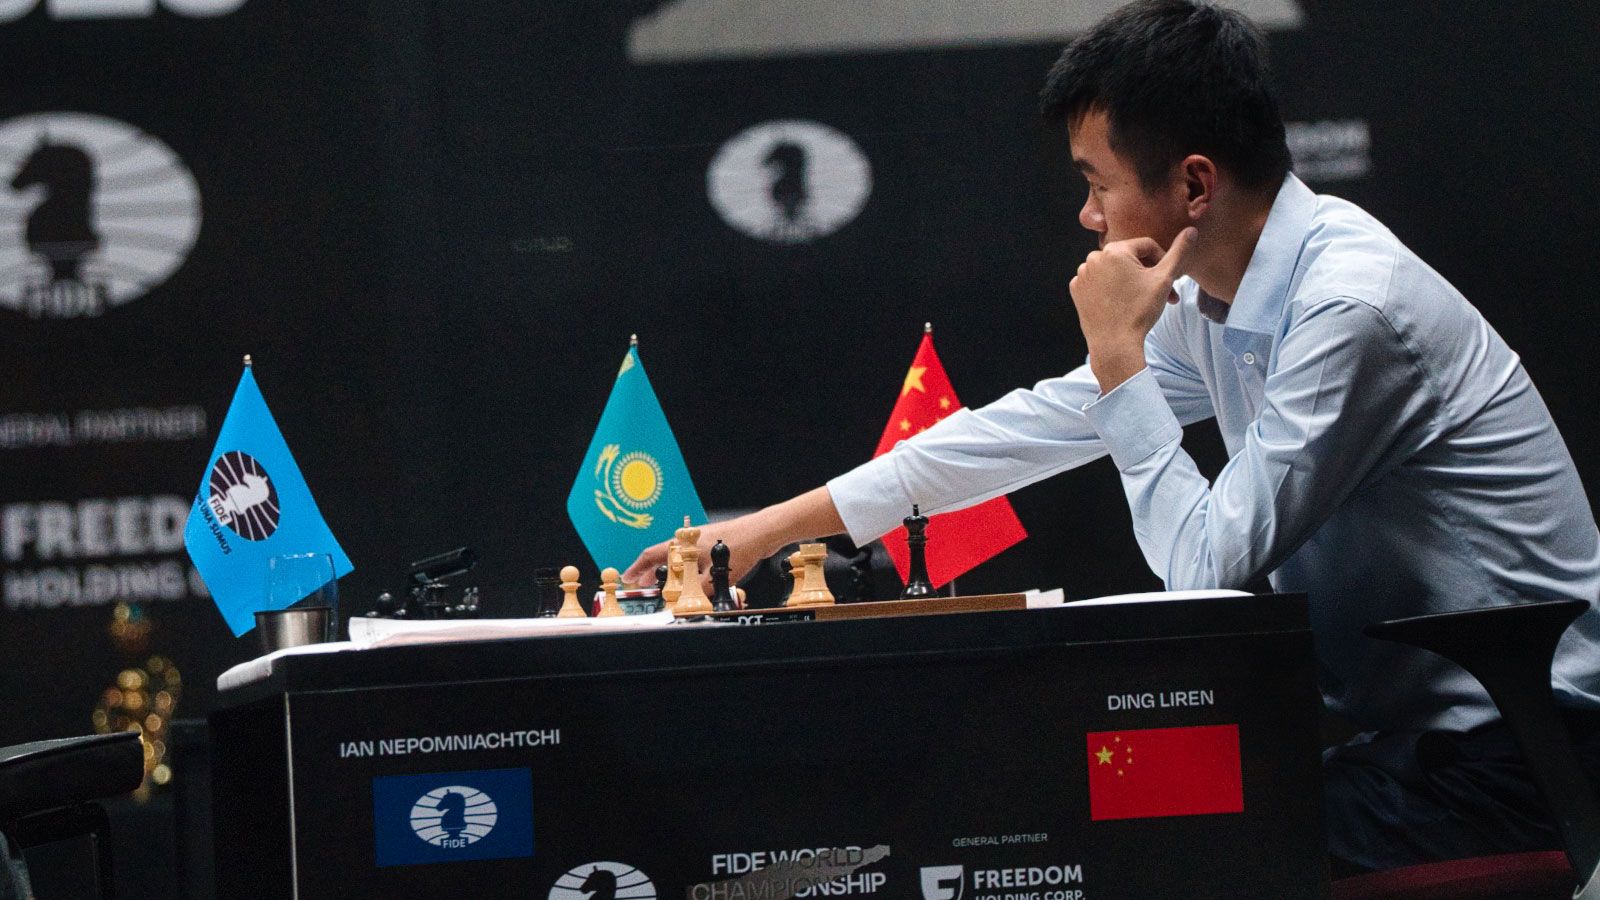 Who Will Break First? Ding and Nepomniachtchi TRADING BLOWS In The